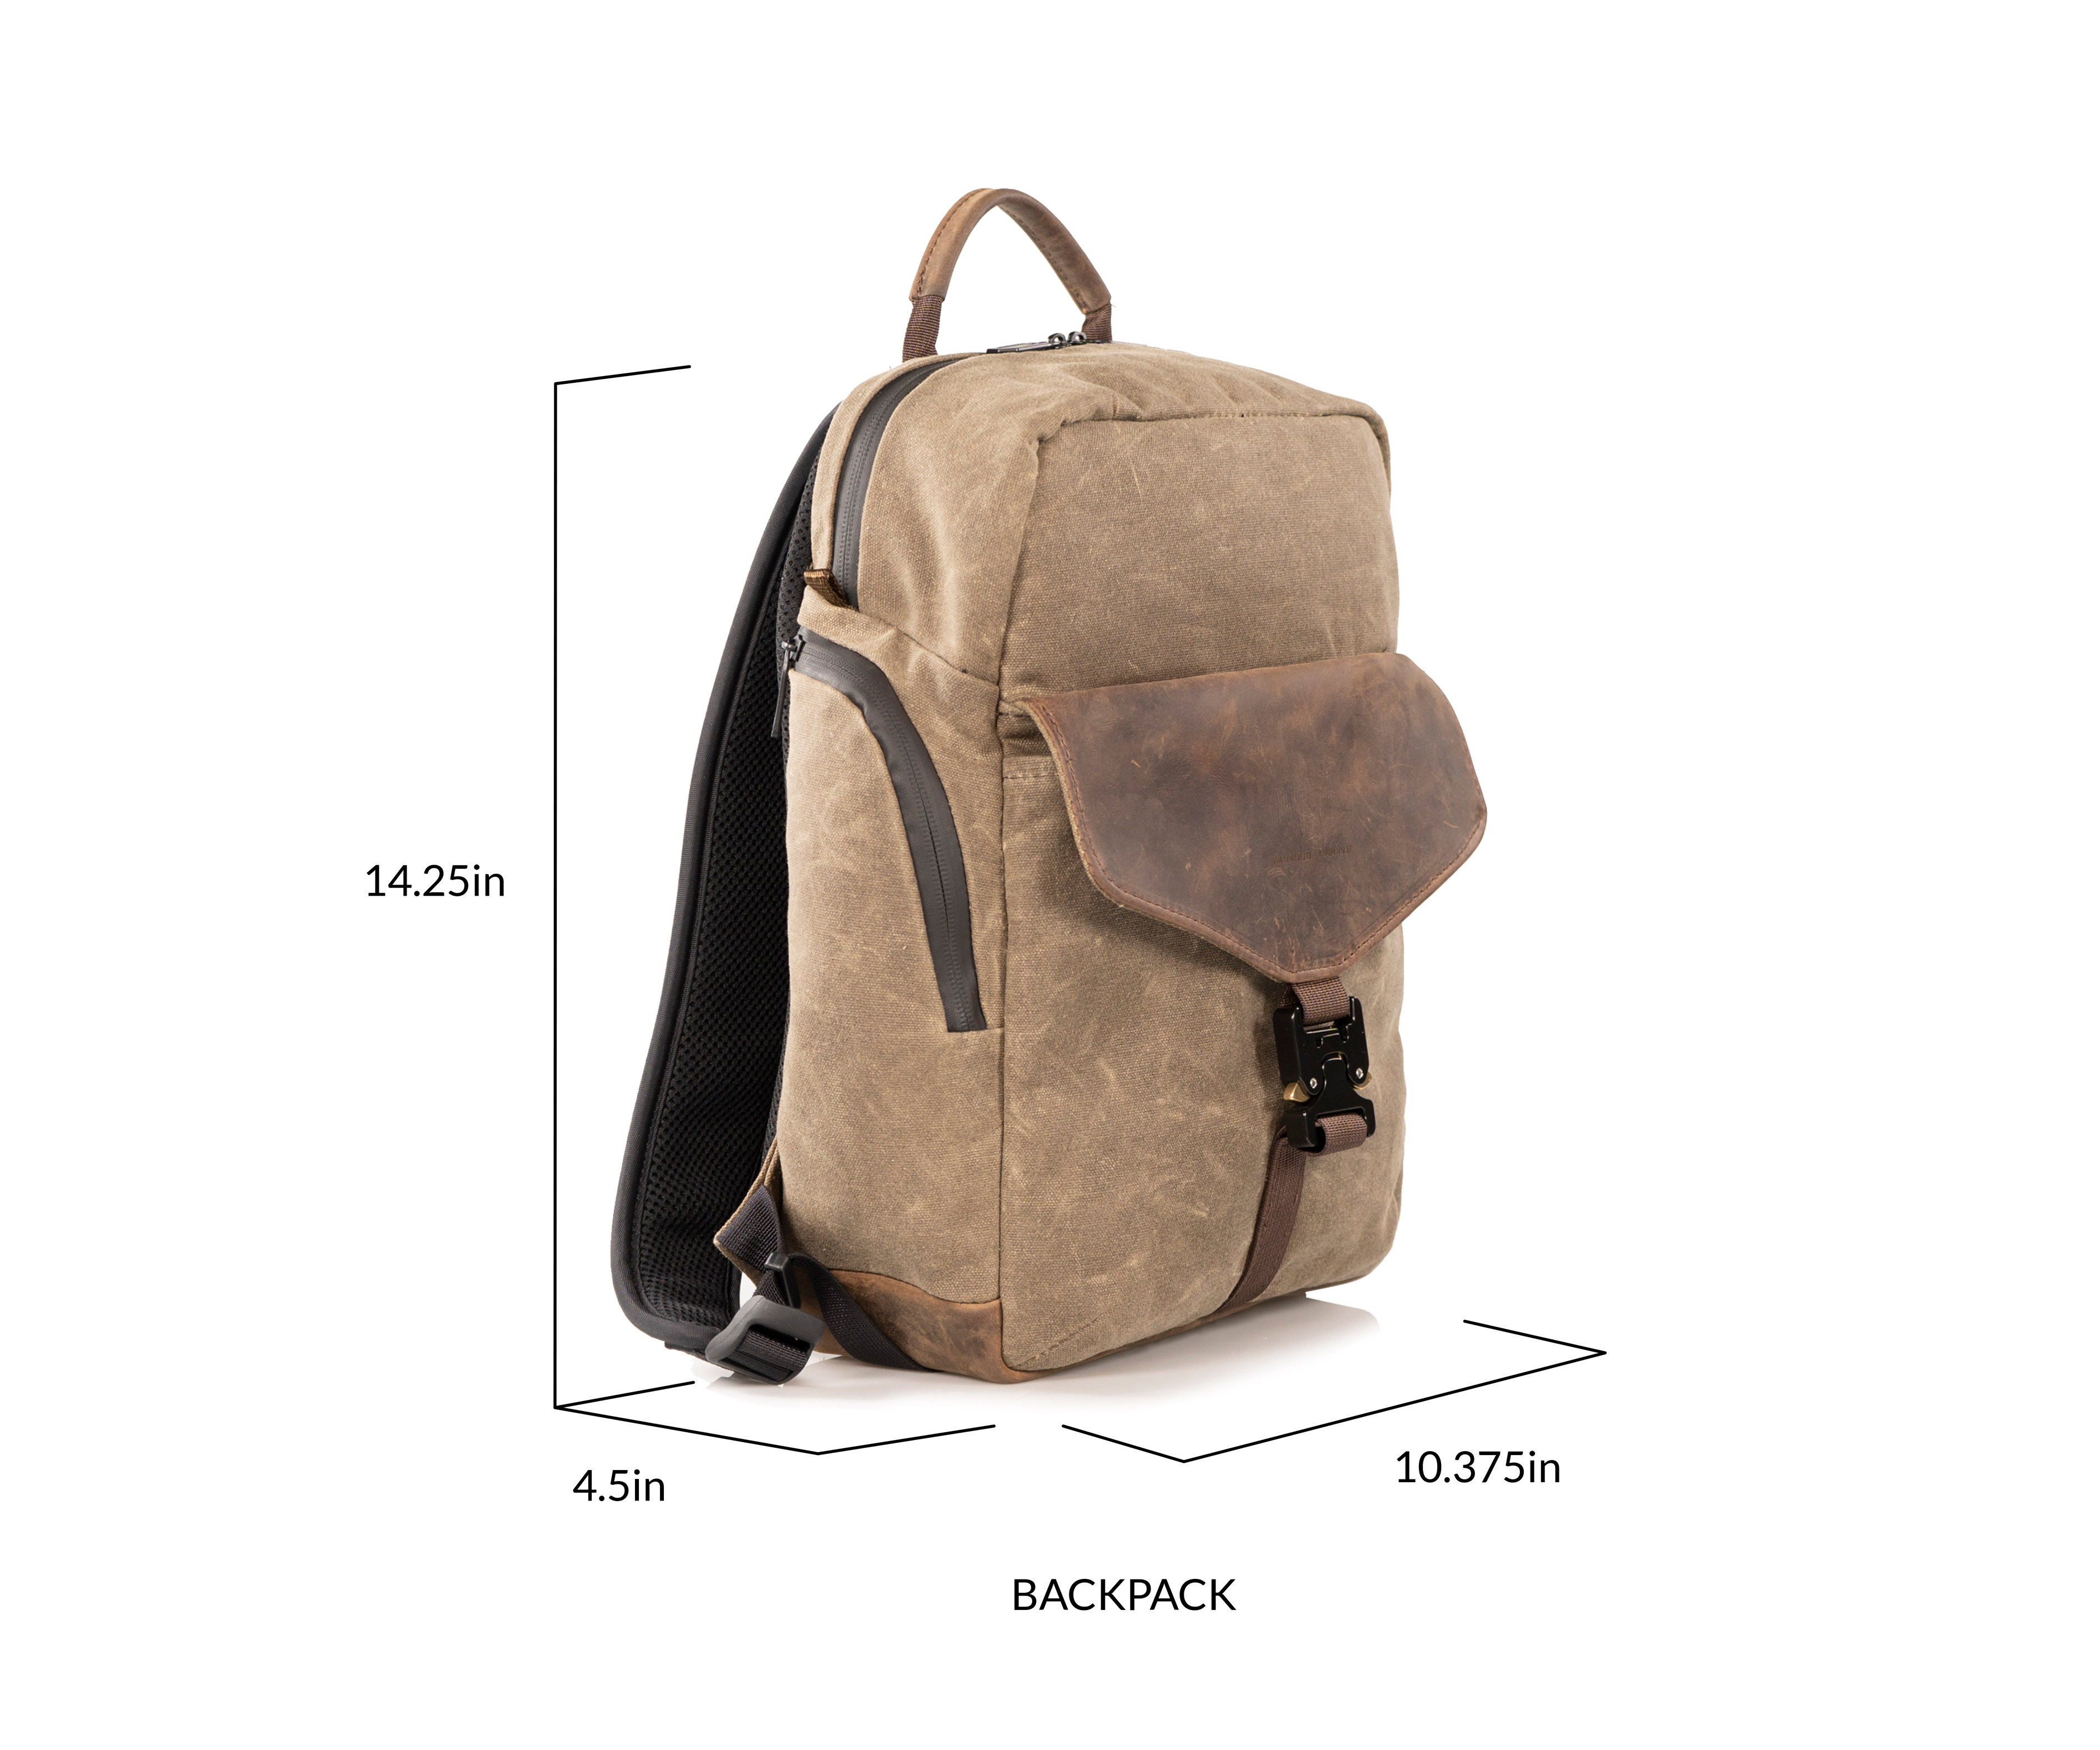 Field Backpack (and Sling) body dimensions